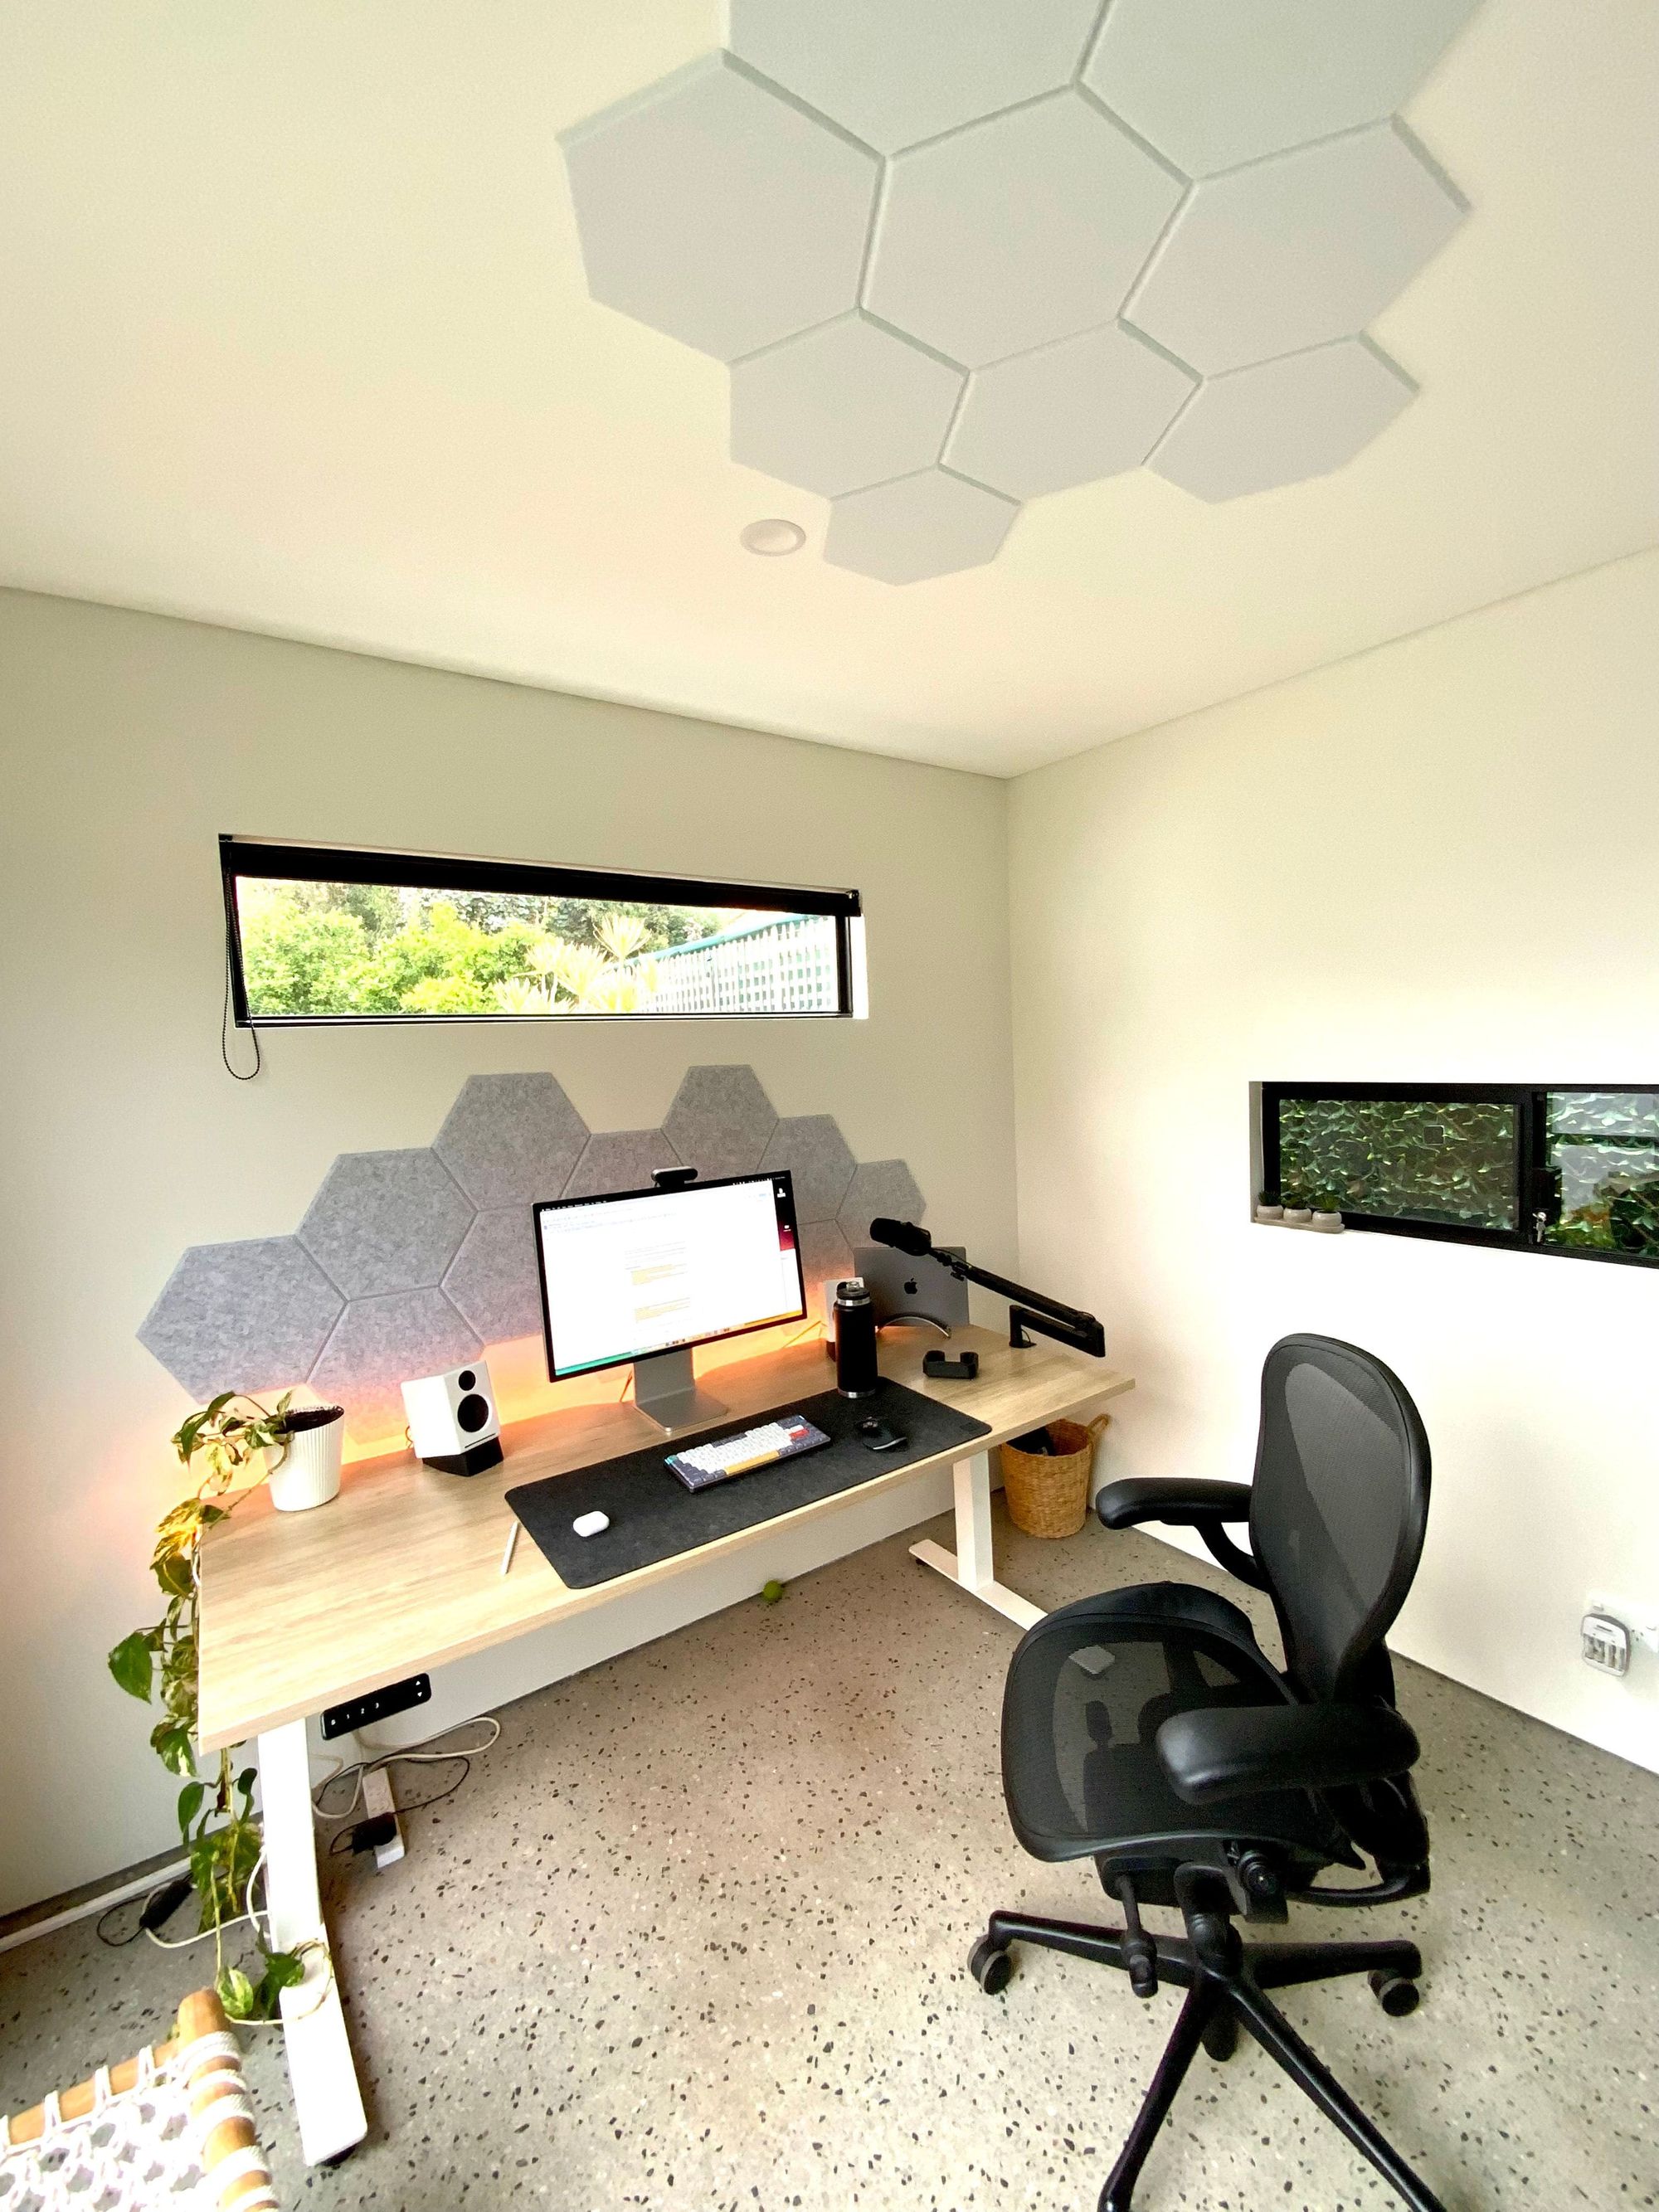 A small and ergonomic home office with acoustic tiles on the wall and ceiling